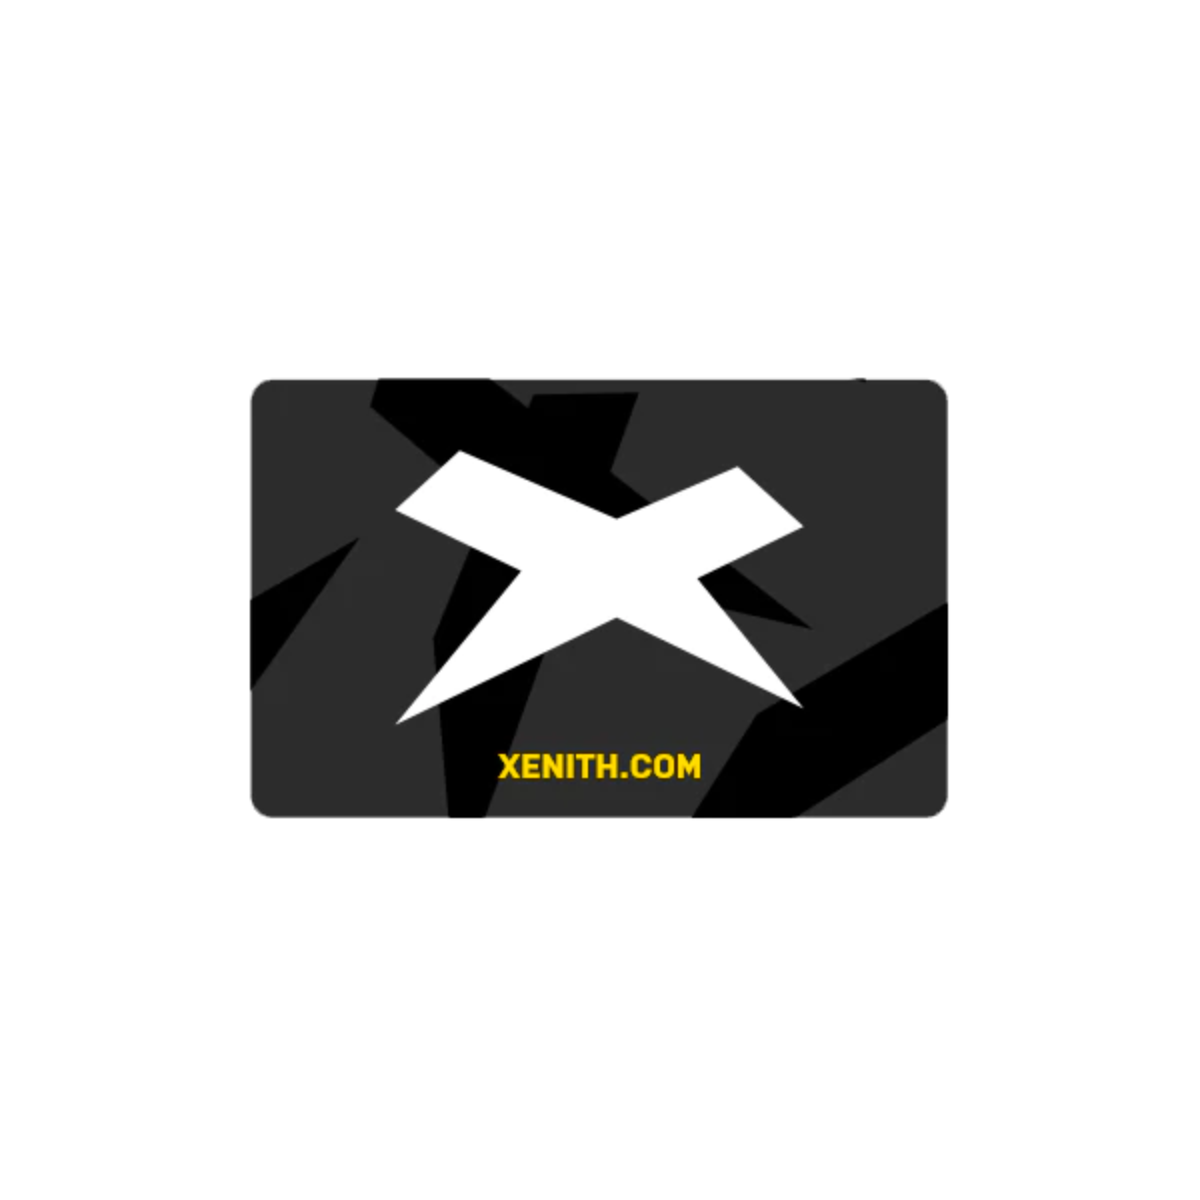 Xenith gift card.